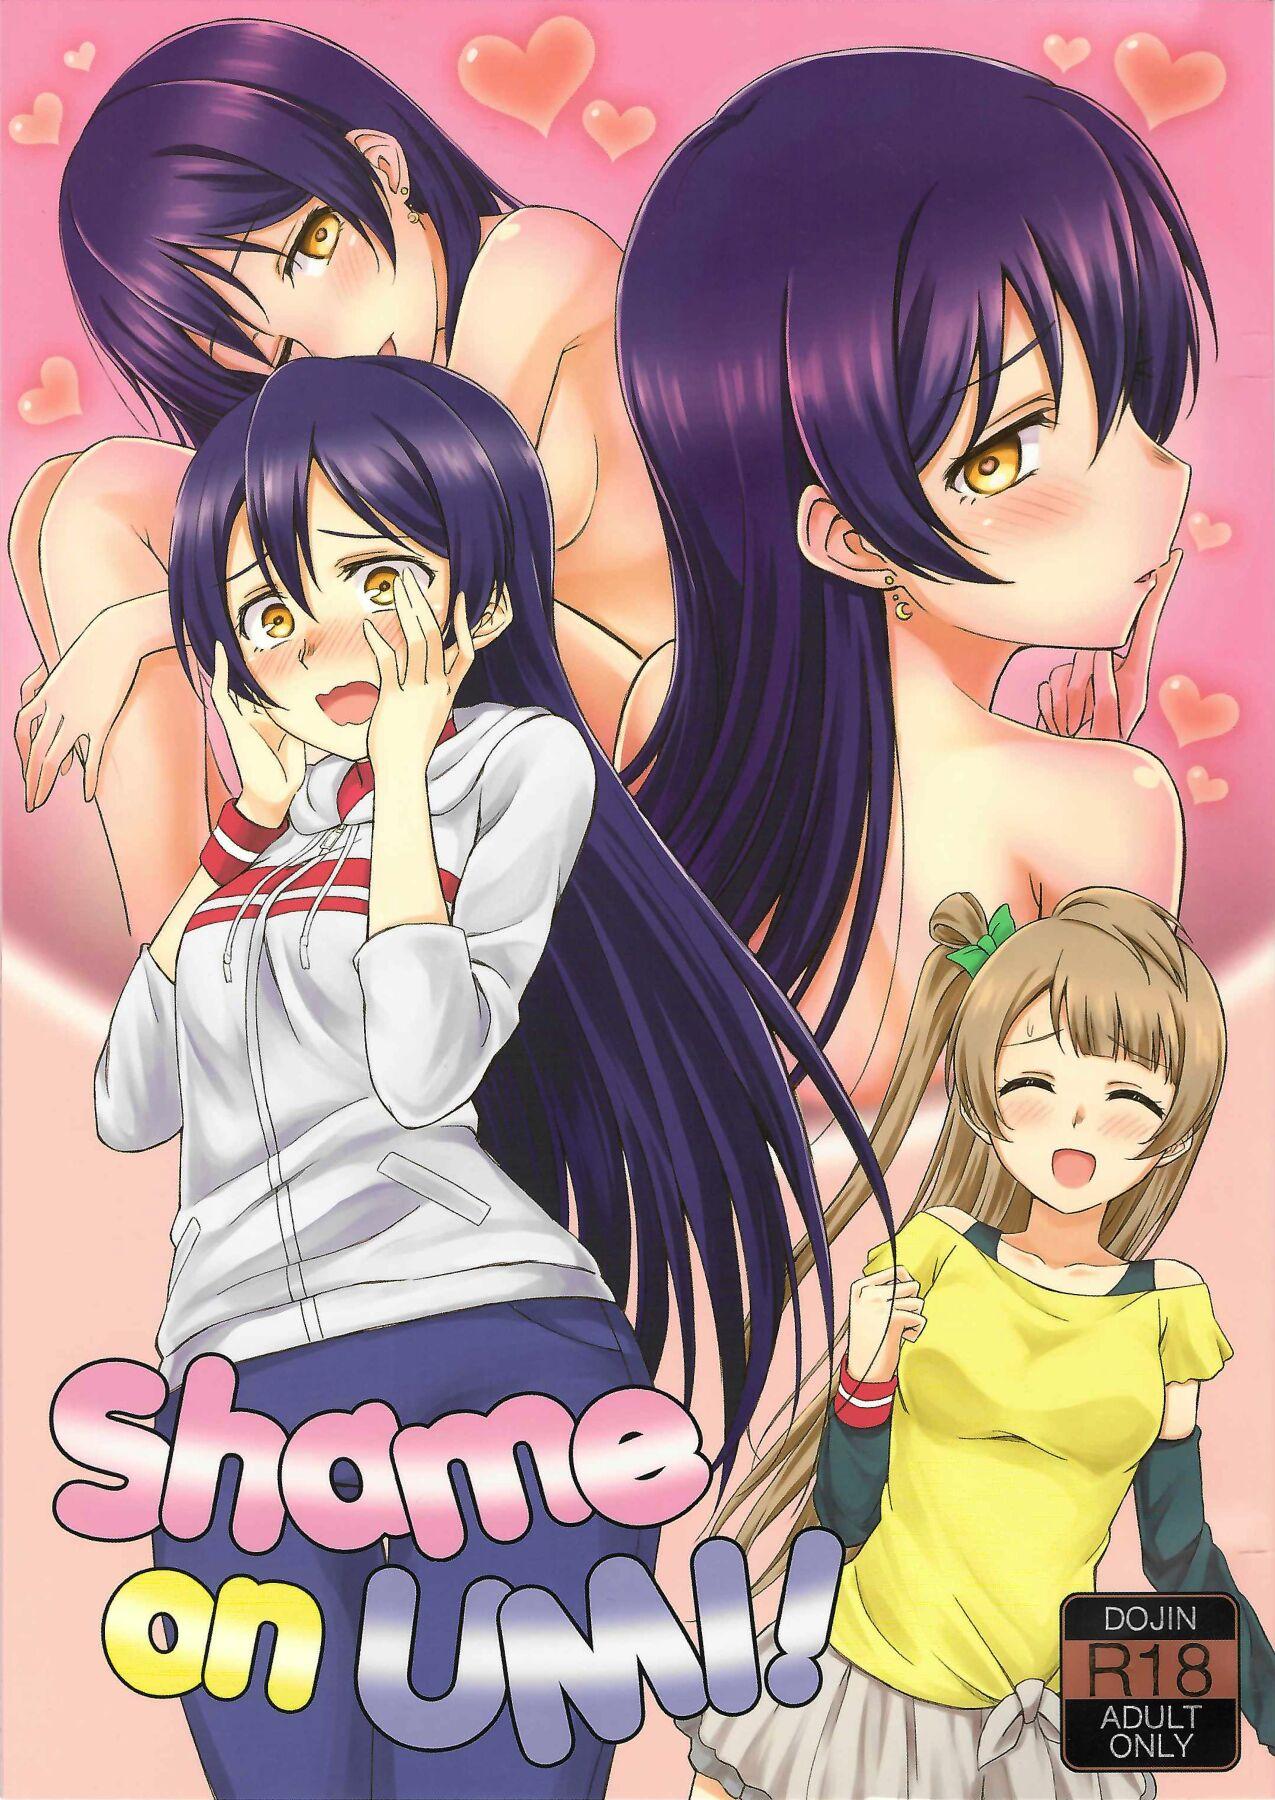 Groupsex Shame on UMI! - Love live Cum Swallow - Picture 1